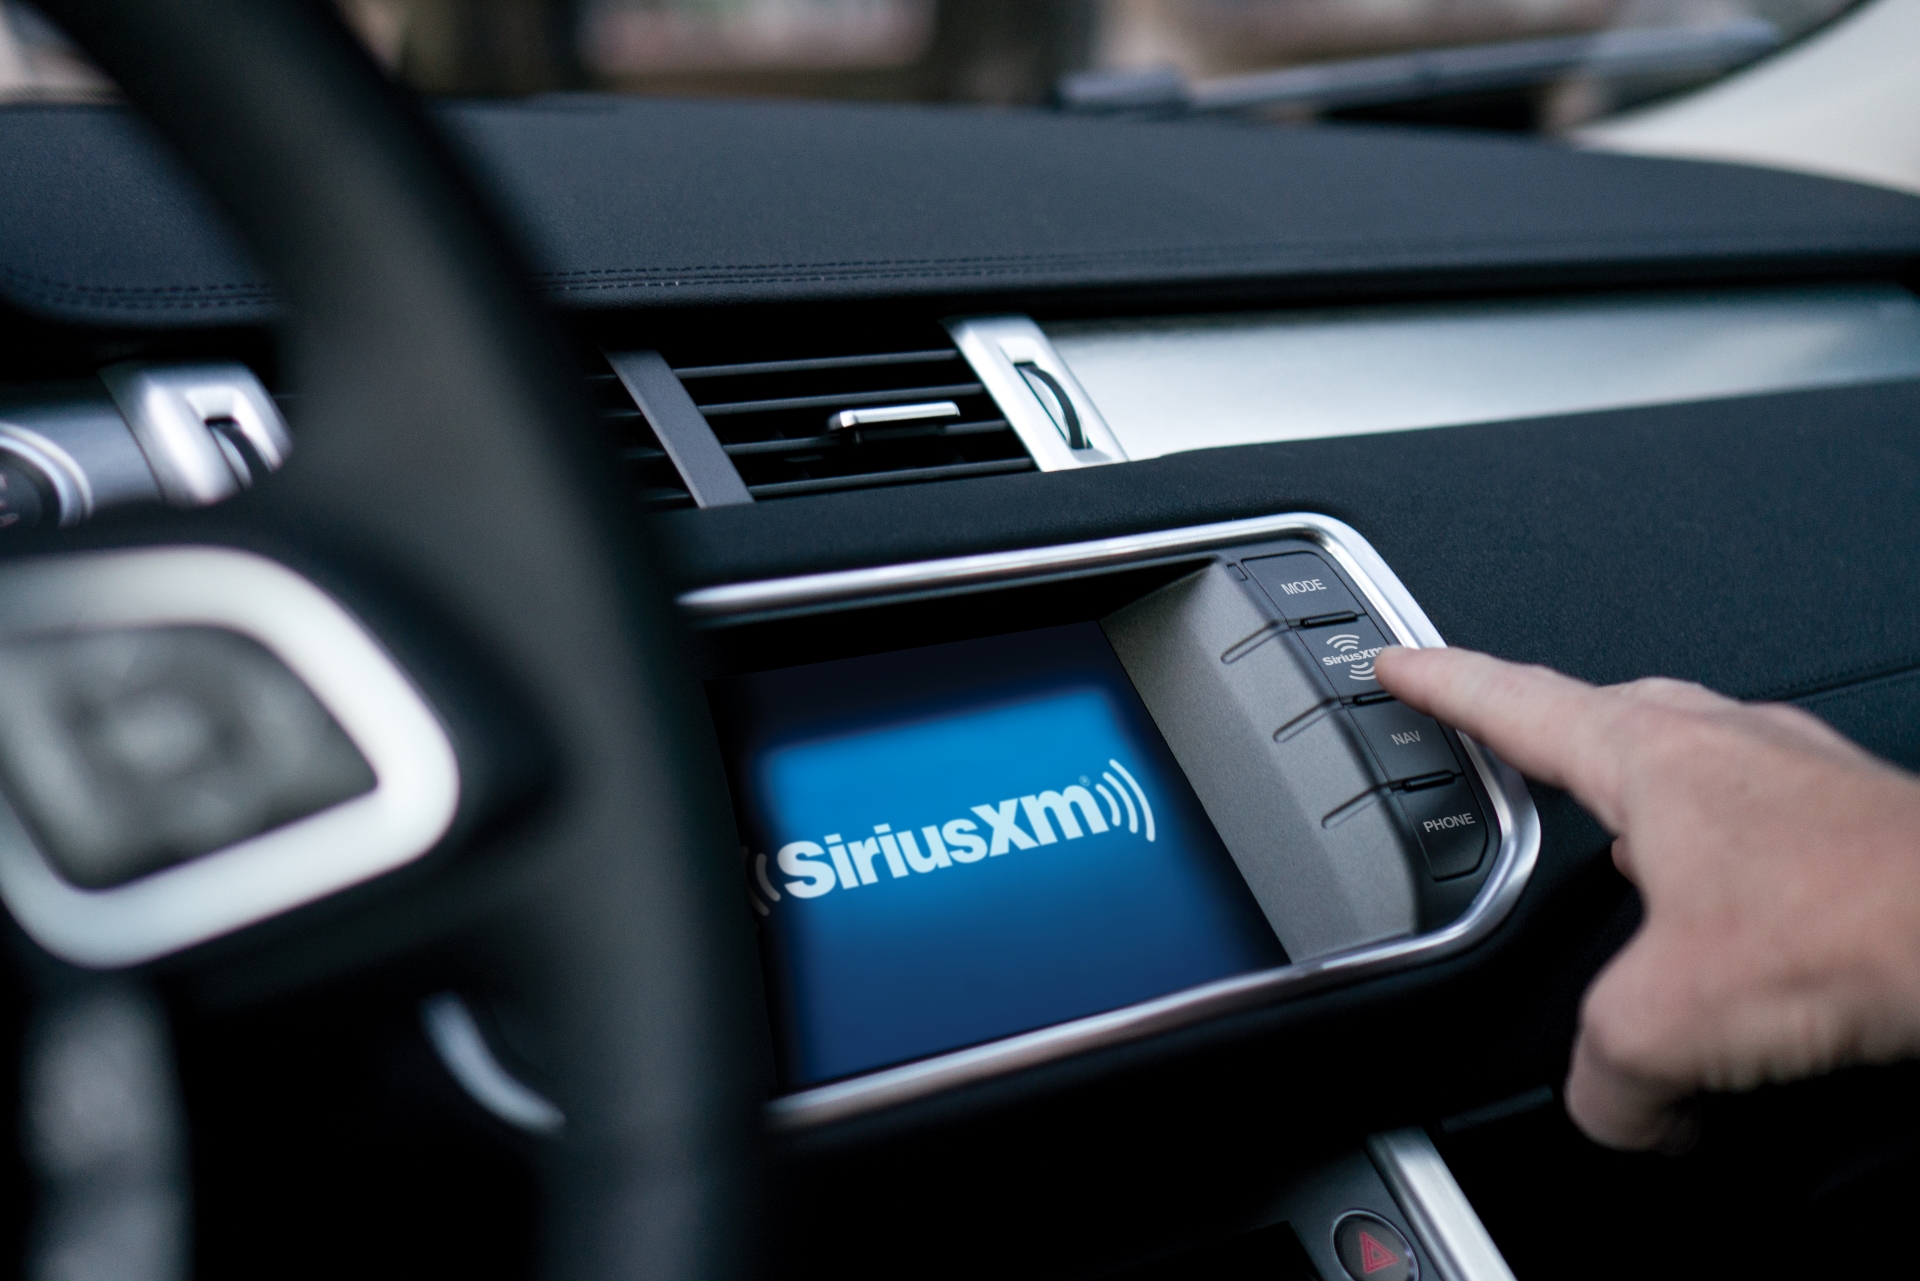 SiriusXM shown on the dashboard touch screen of a car with a finger pressing a button.